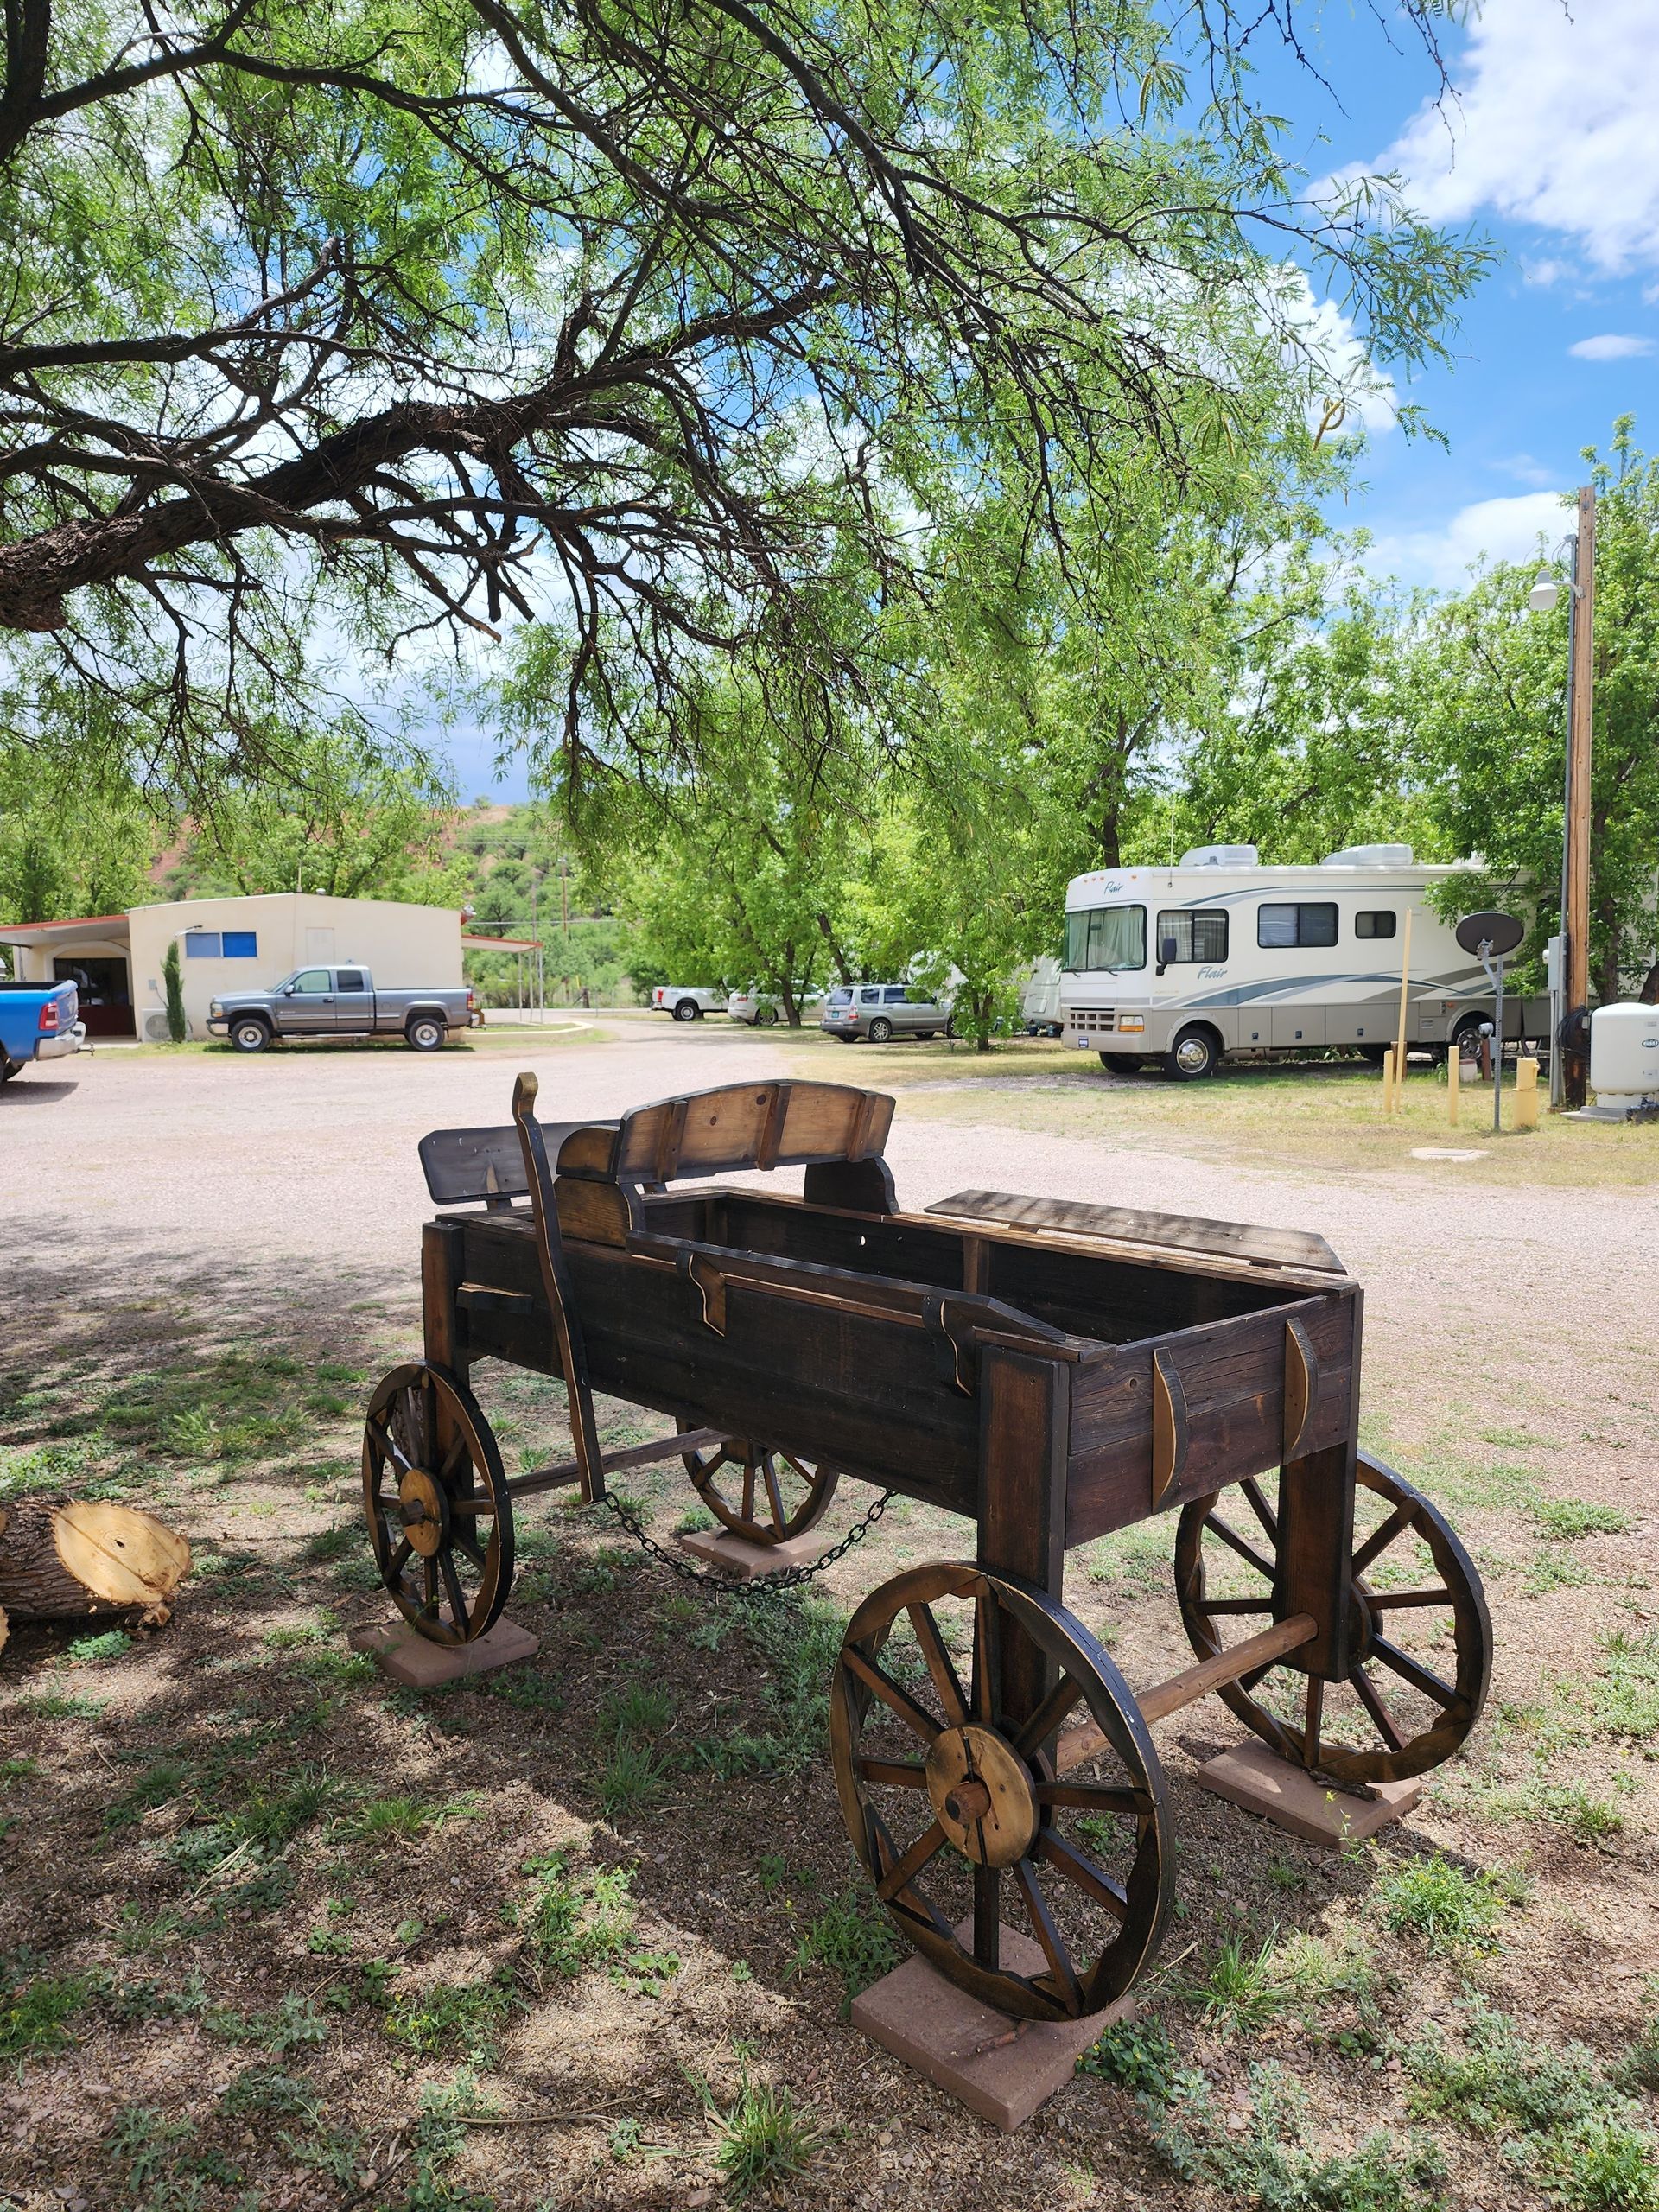 A wooden wagon is parked in a parking lot next to a tree.